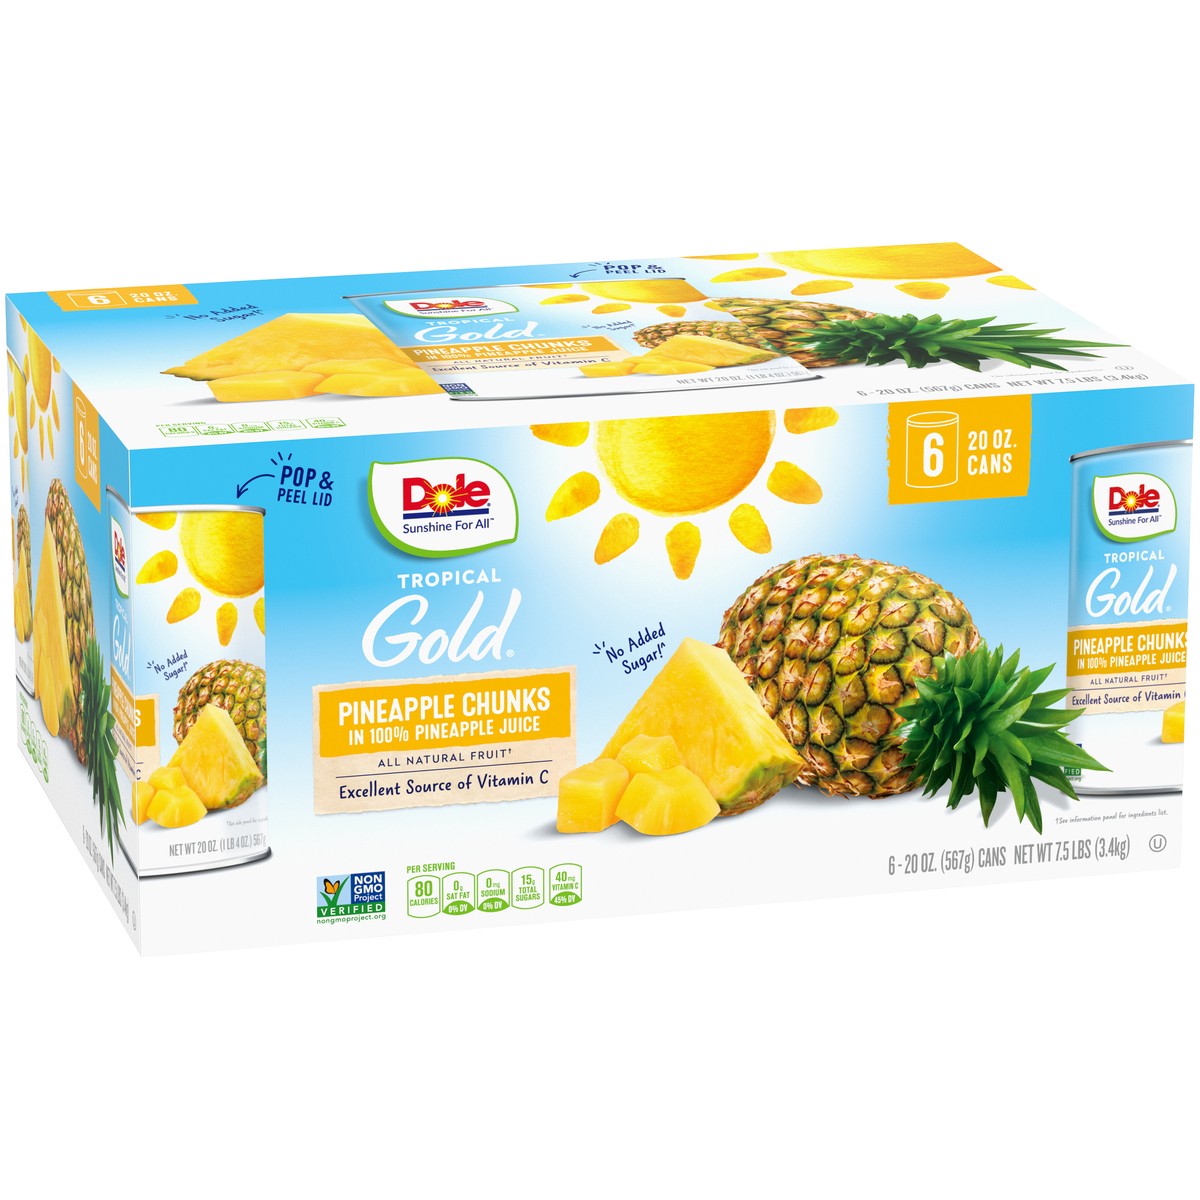 slide 2 of 9, Dole Tropical Gold Pineapple Chunks in 100% Pineapple Juice 6-20 oz. Cans, 7.5 lb